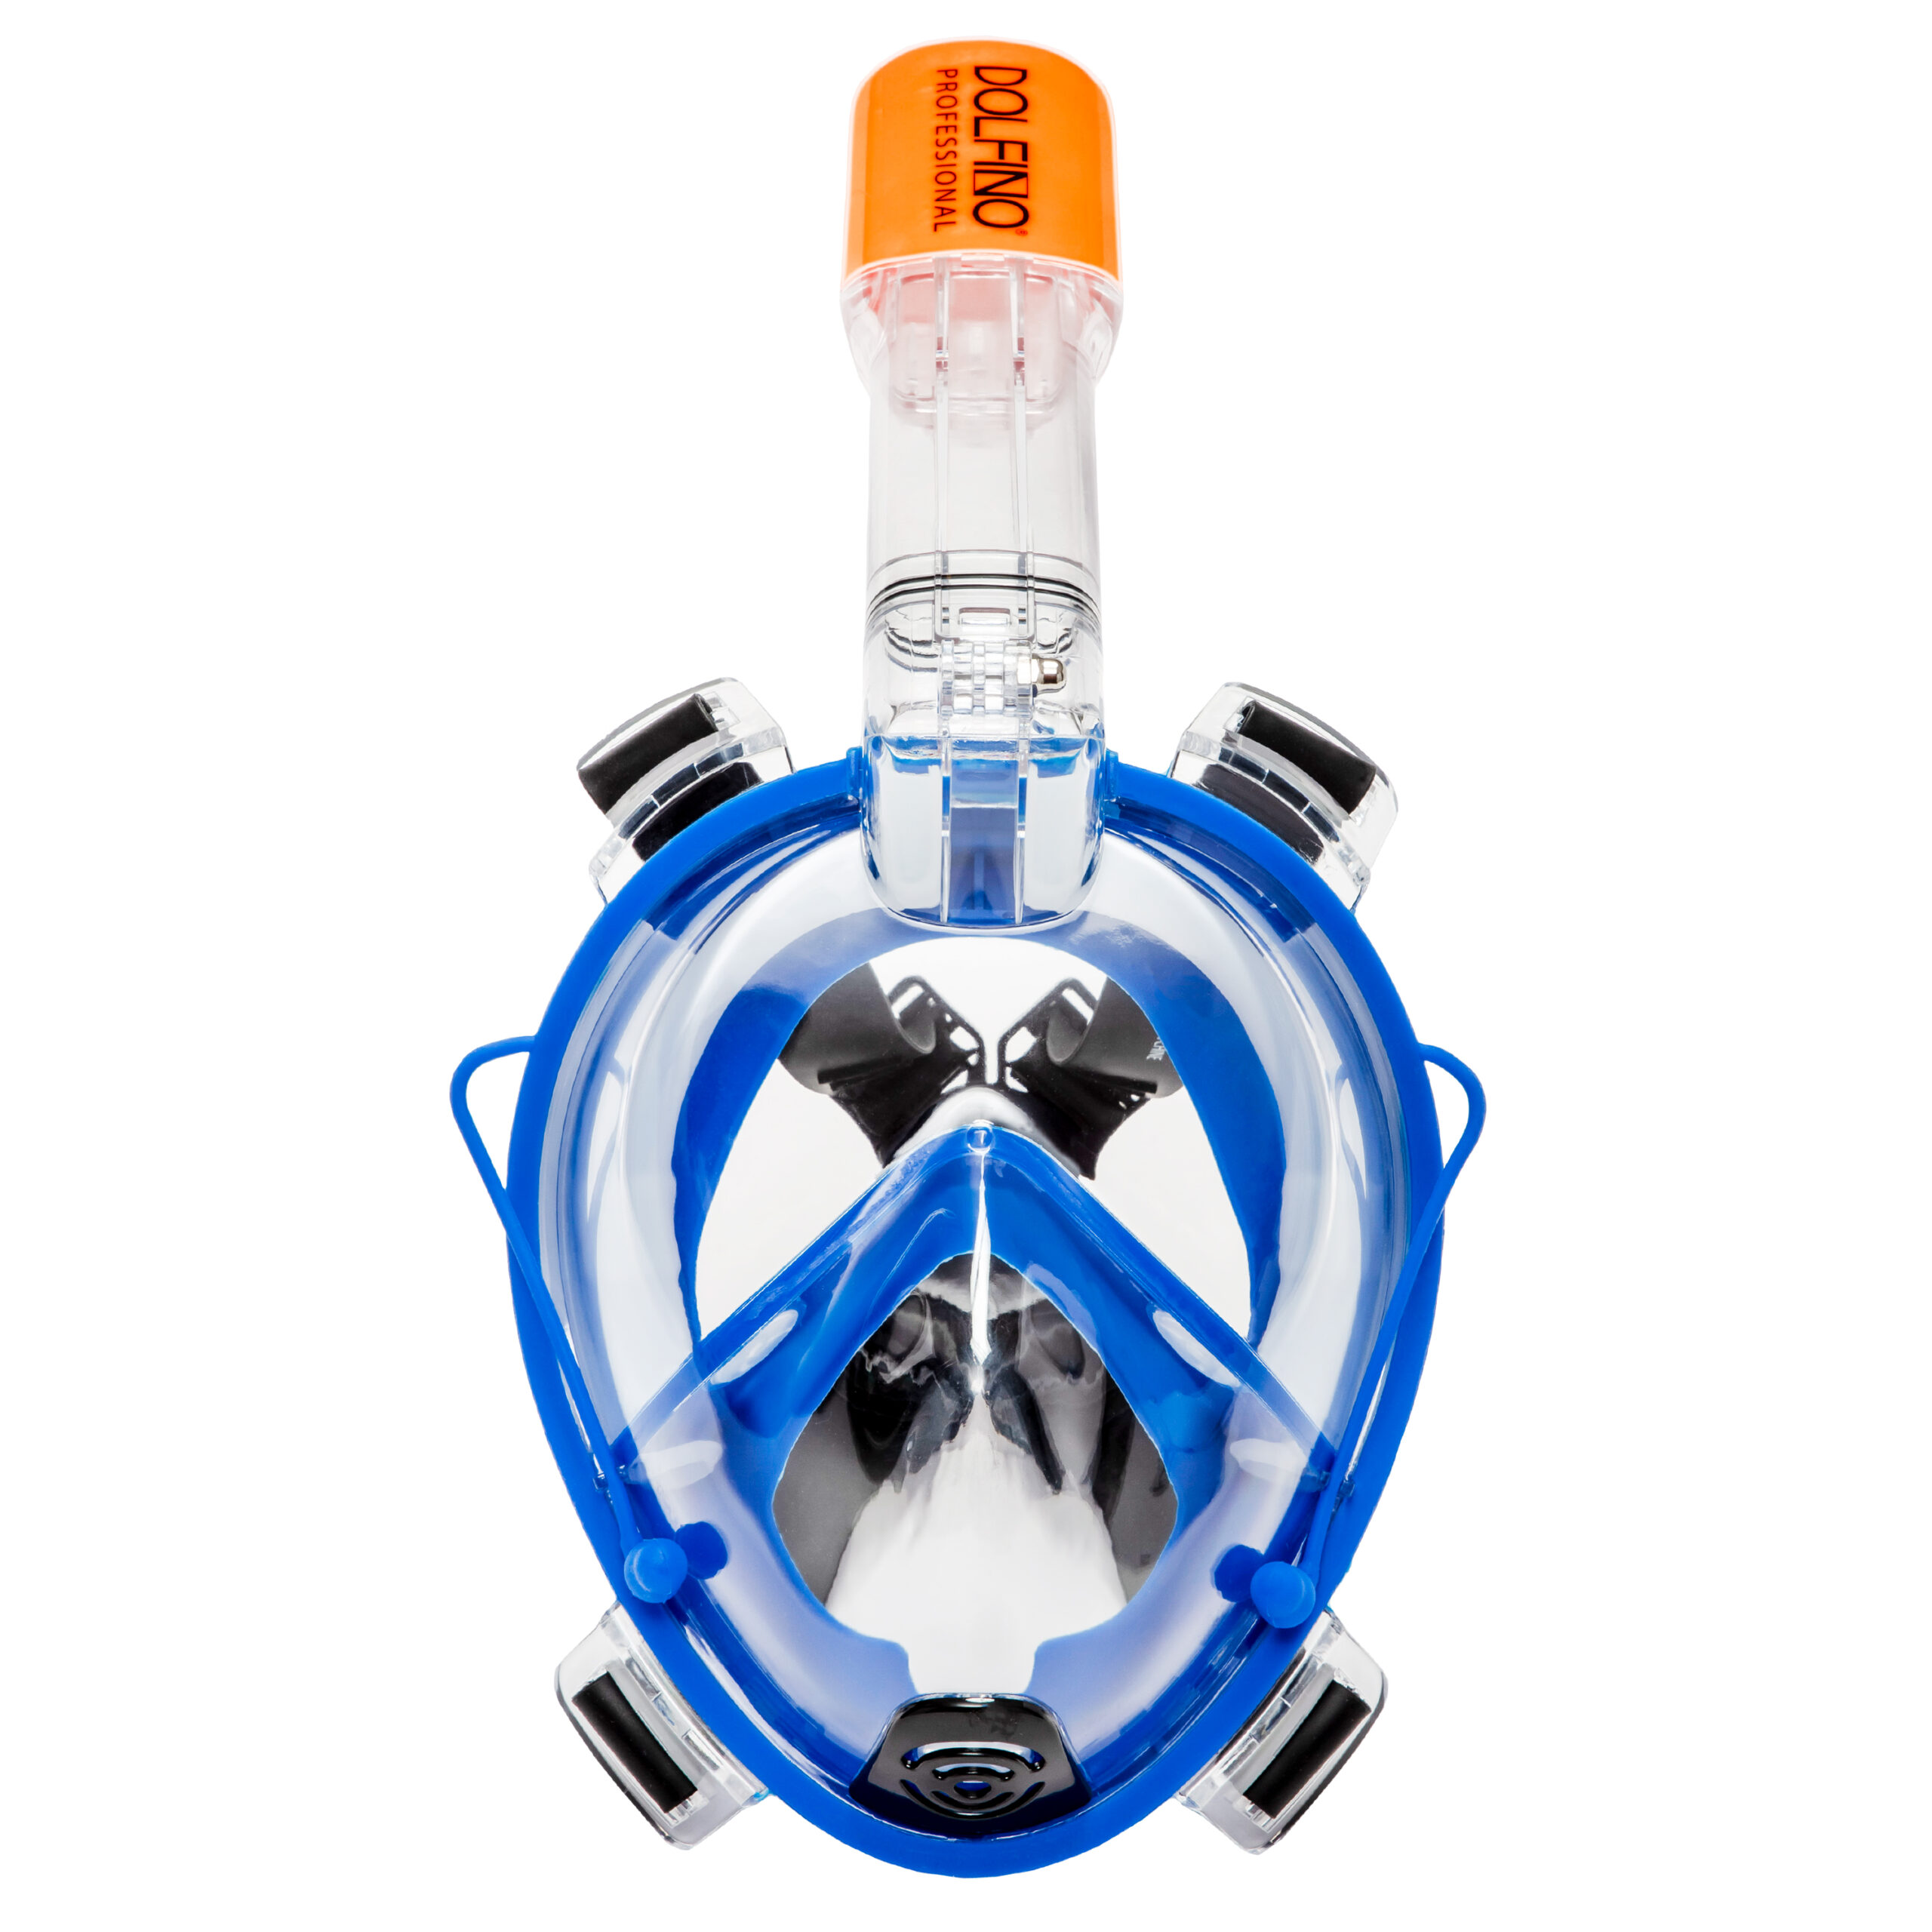 5 Great Options for Snorkel Masks with GoPro Mounts - The Snorkel Store